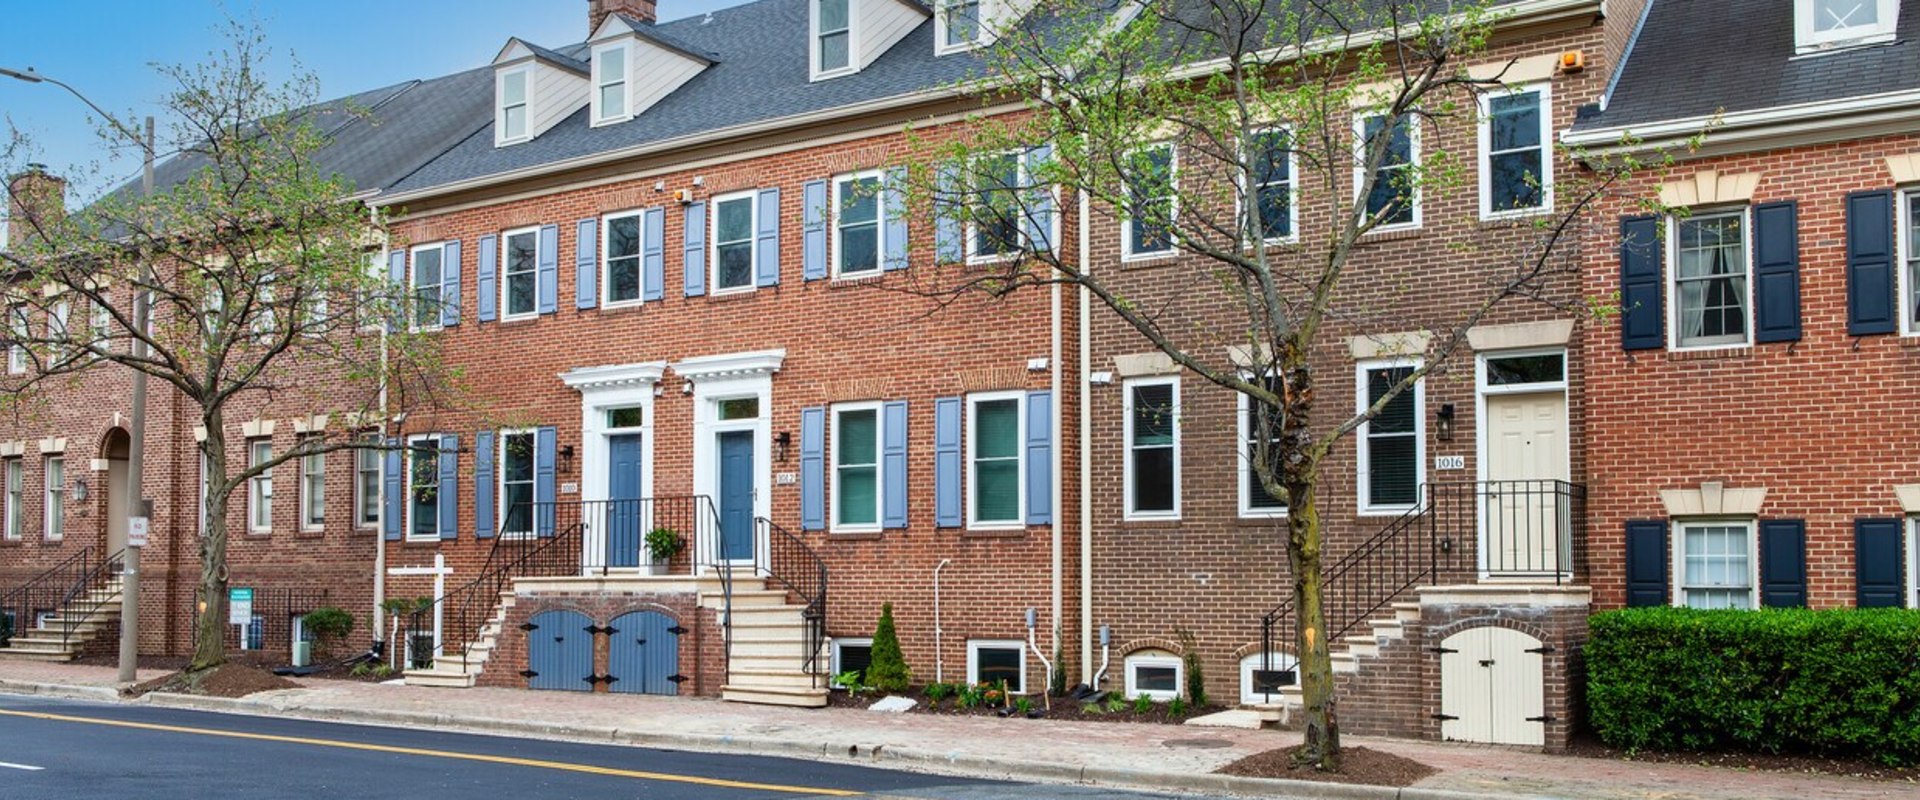 Explore Townhomes for Sale or Rent in Alexandria, Virginia